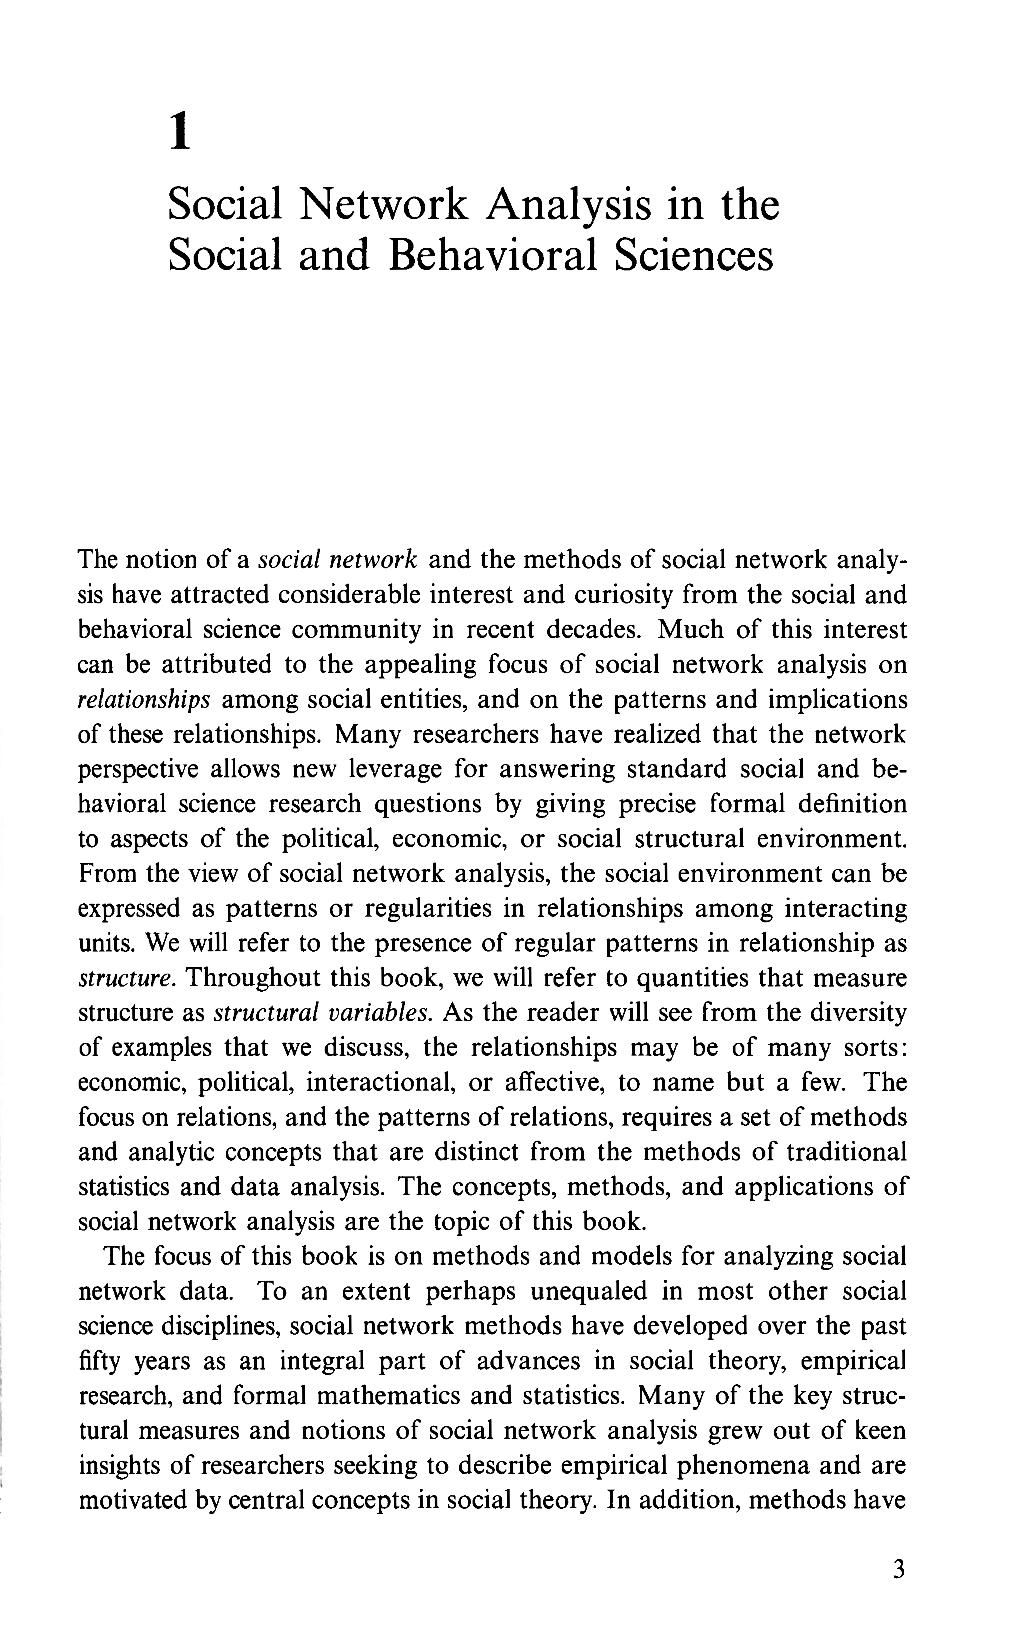 Social Network Analysis in the Social and Behavioral Sciences